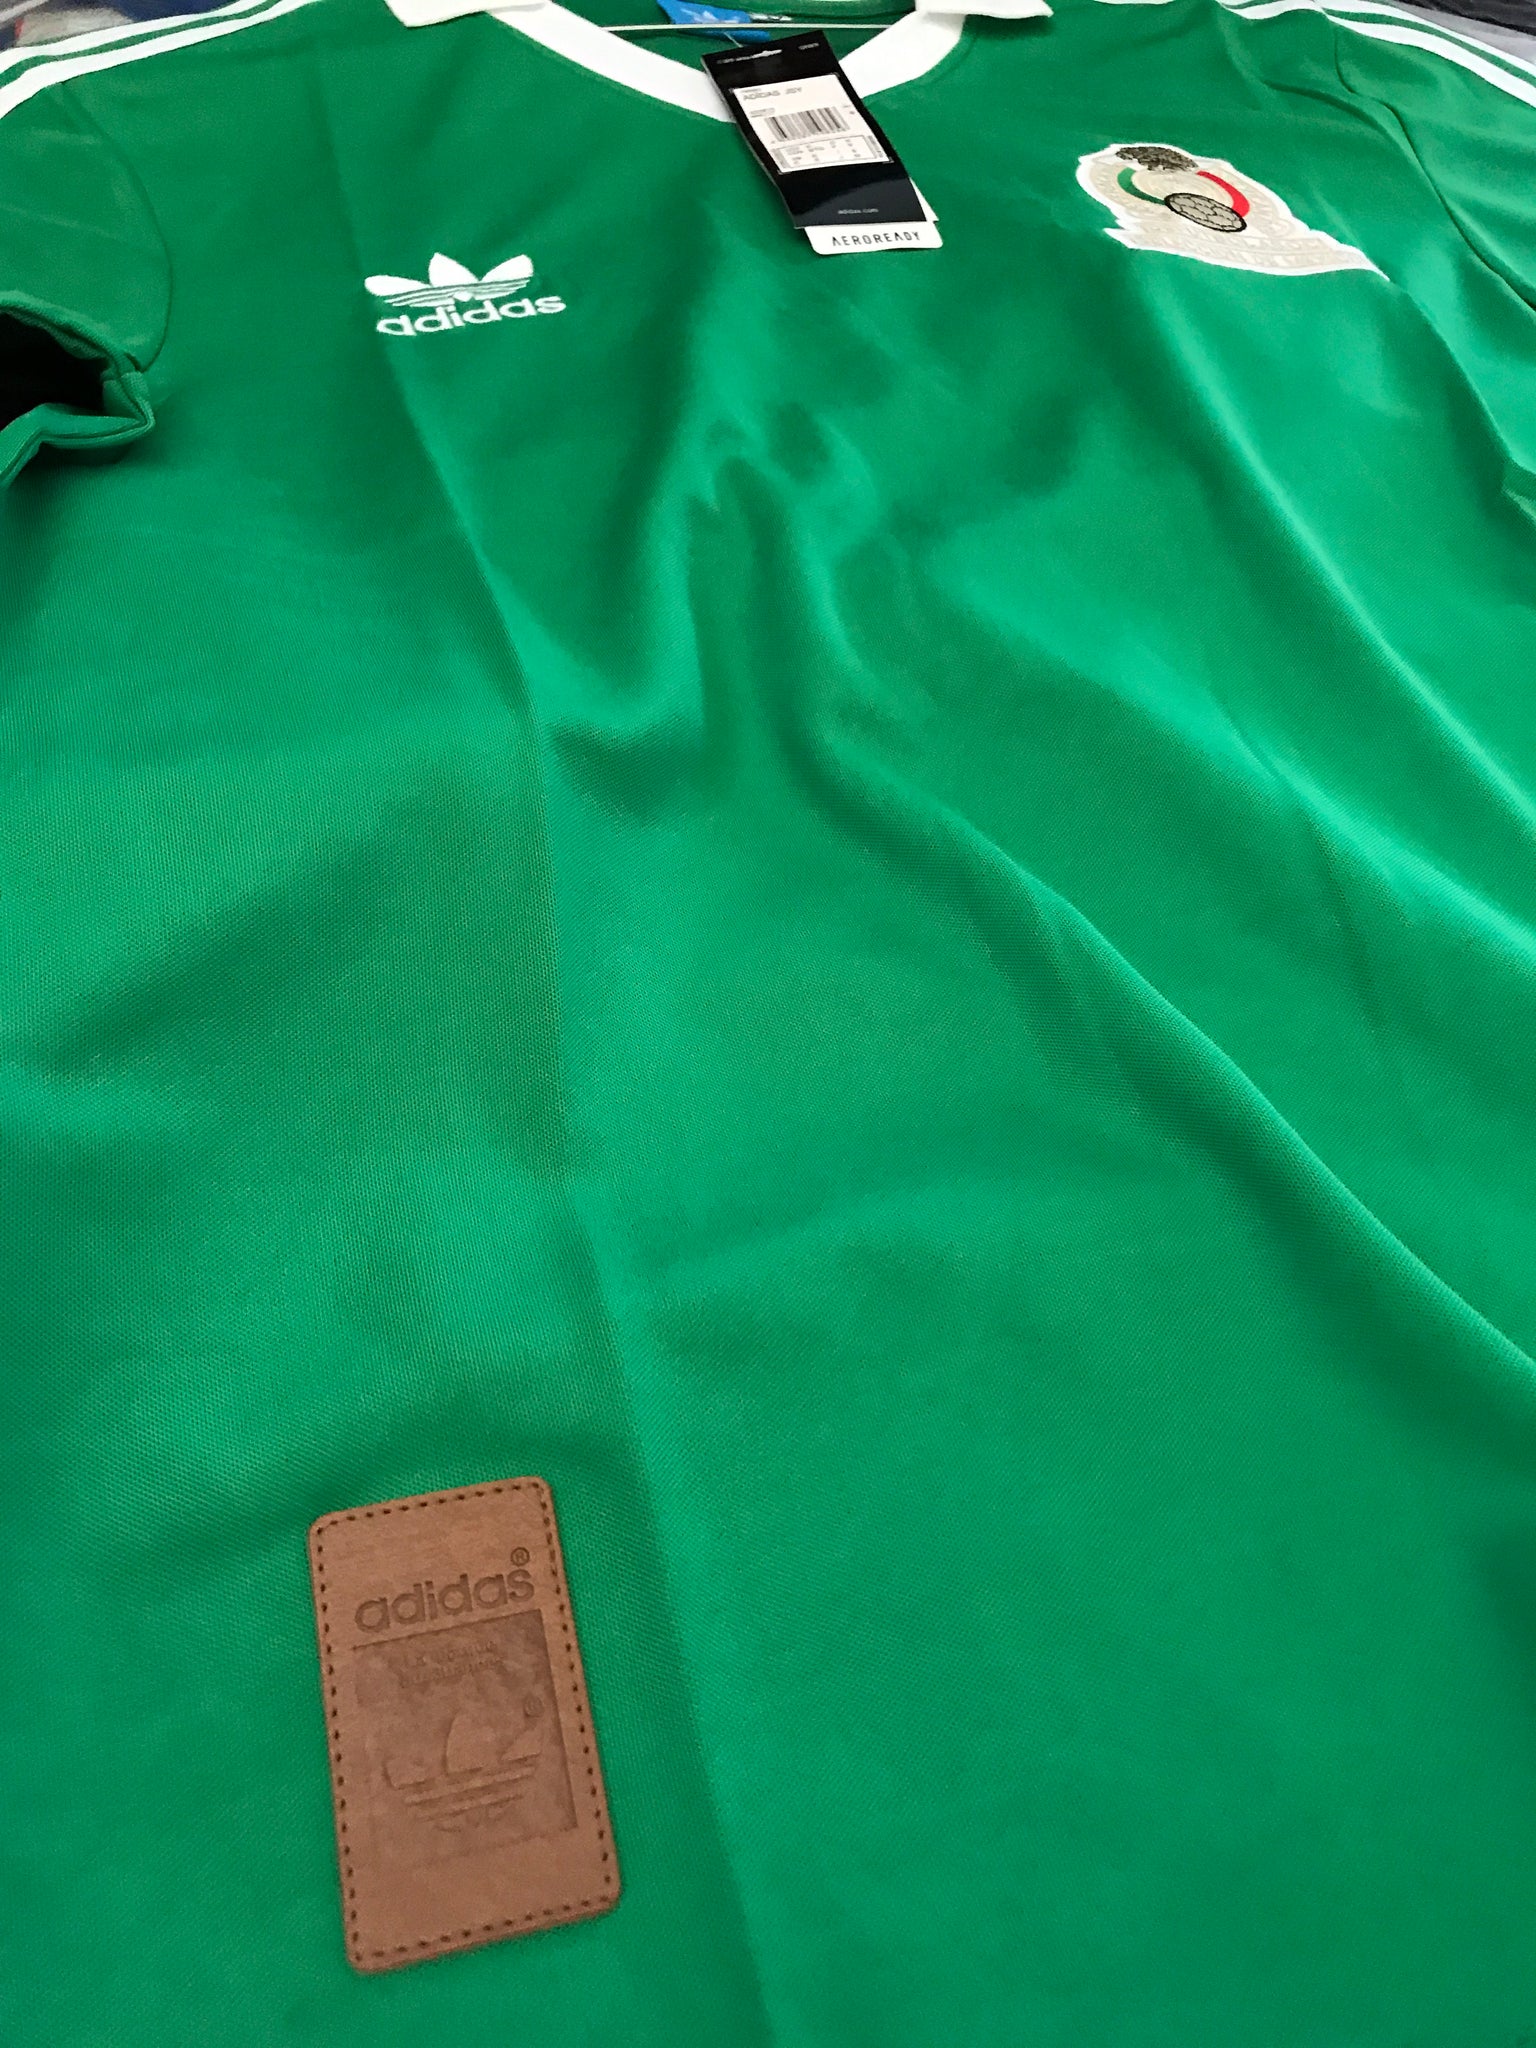 mexico 86 jersey